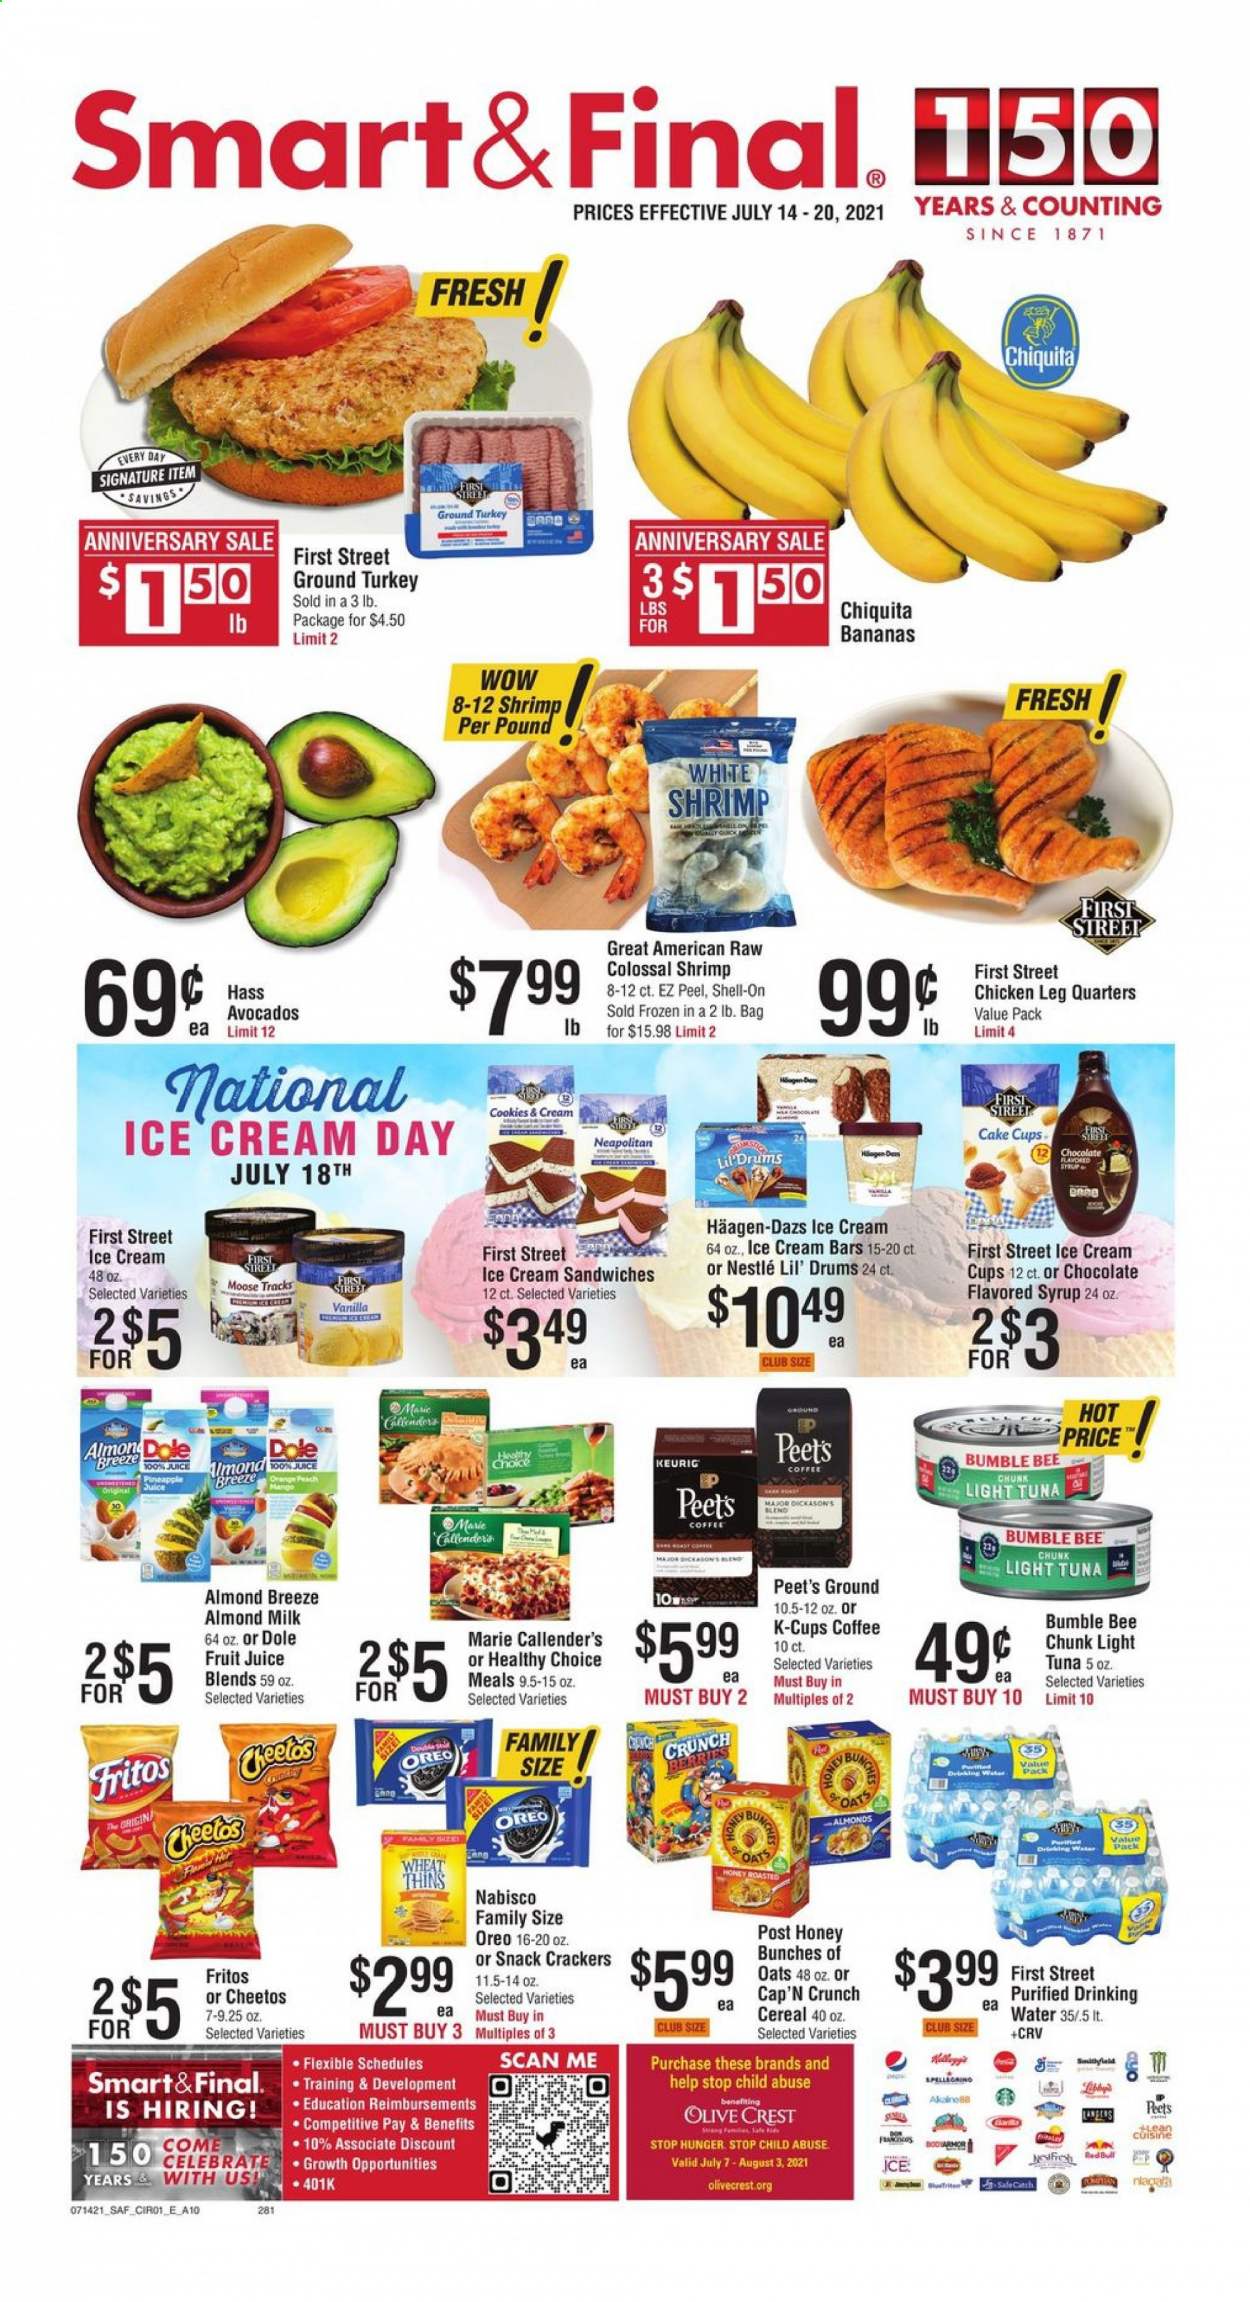 thumbnail - Smart & Final Flyer - 07/14/2021 - 07/20/2021 - Sales products - cake, Dole, avocado, pineapple, oranges, tuna, shrimps, Bumble Bee, Lean Cuisine, Healthy Choice, Marie Callender's, Oreo, almond milk, Almond Breeze, ice cream, ice cream bars, ice cream sandwich, Häagen-Dazs, cookies, Nestlé, crackers, Fritos, Cheetos, Thins, light tuna, cereals, Cap'n Crunch, syrup, juice, fruit juice, coffee, coffee capsules, K-Cups, Keurig, ground turkey, chicken legs. Page 1.